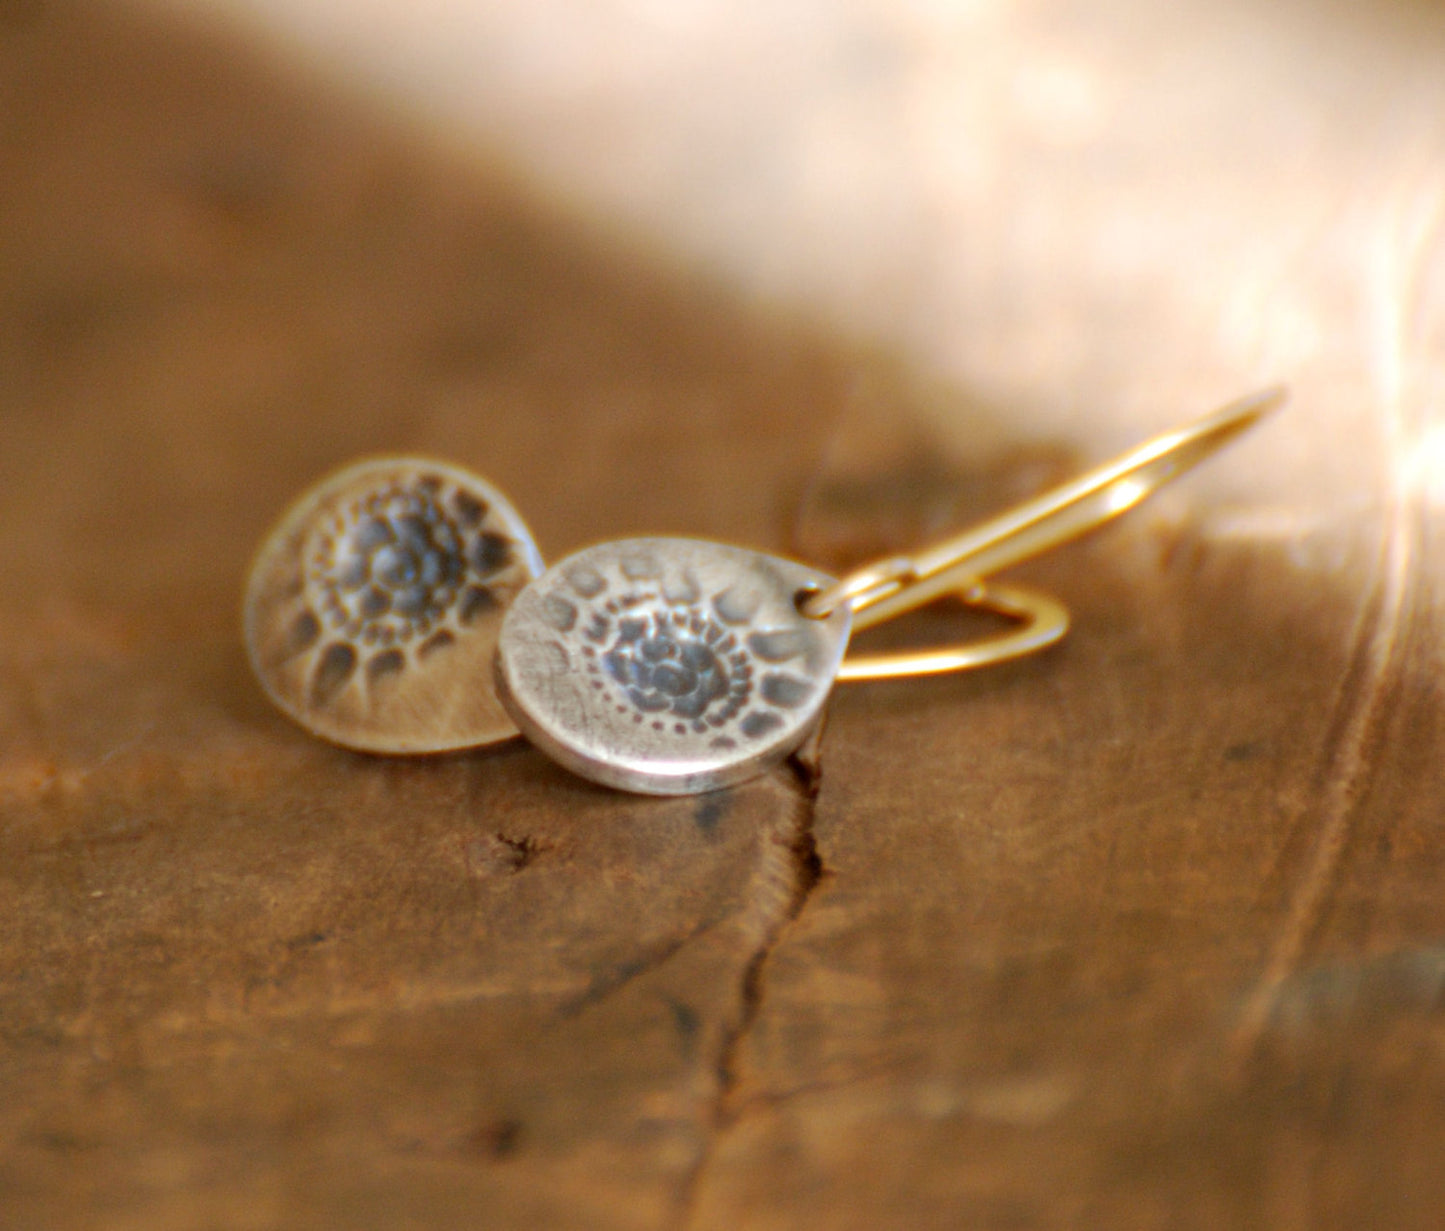 Charleston. Old South Collection Earrings - Oxidized fine silver. 14kt Goldfill. Mixed Metal. Handmade